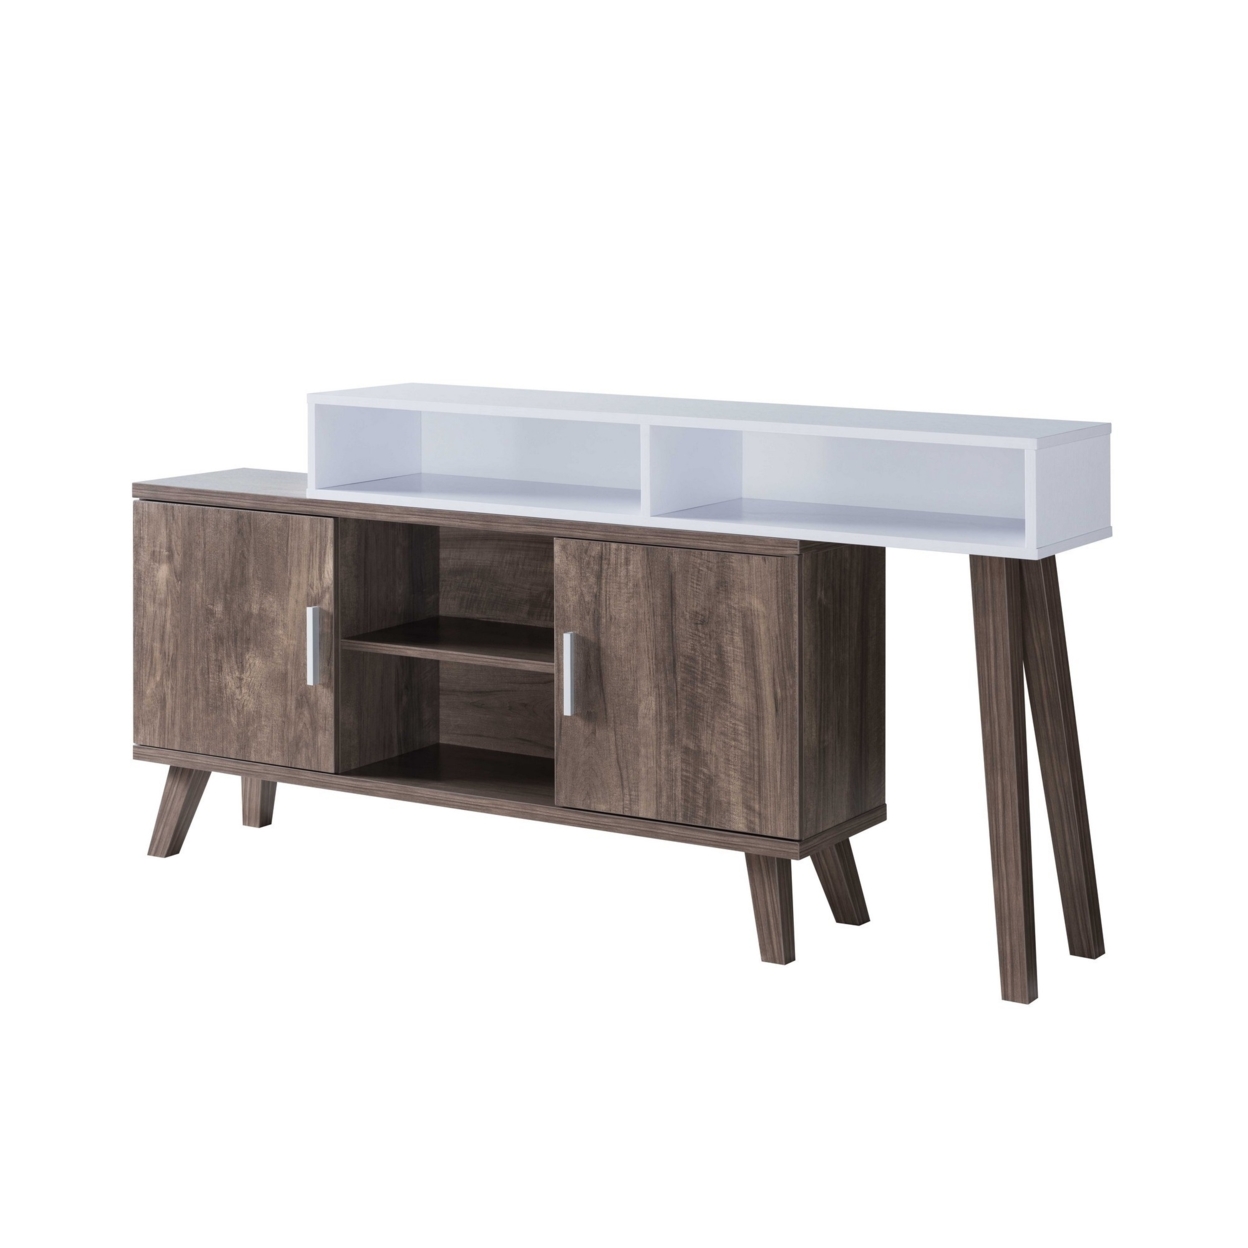 2 Tier Console Table With 4 Compartments And Cabinets, White And Brown- Saltoro Sherpi